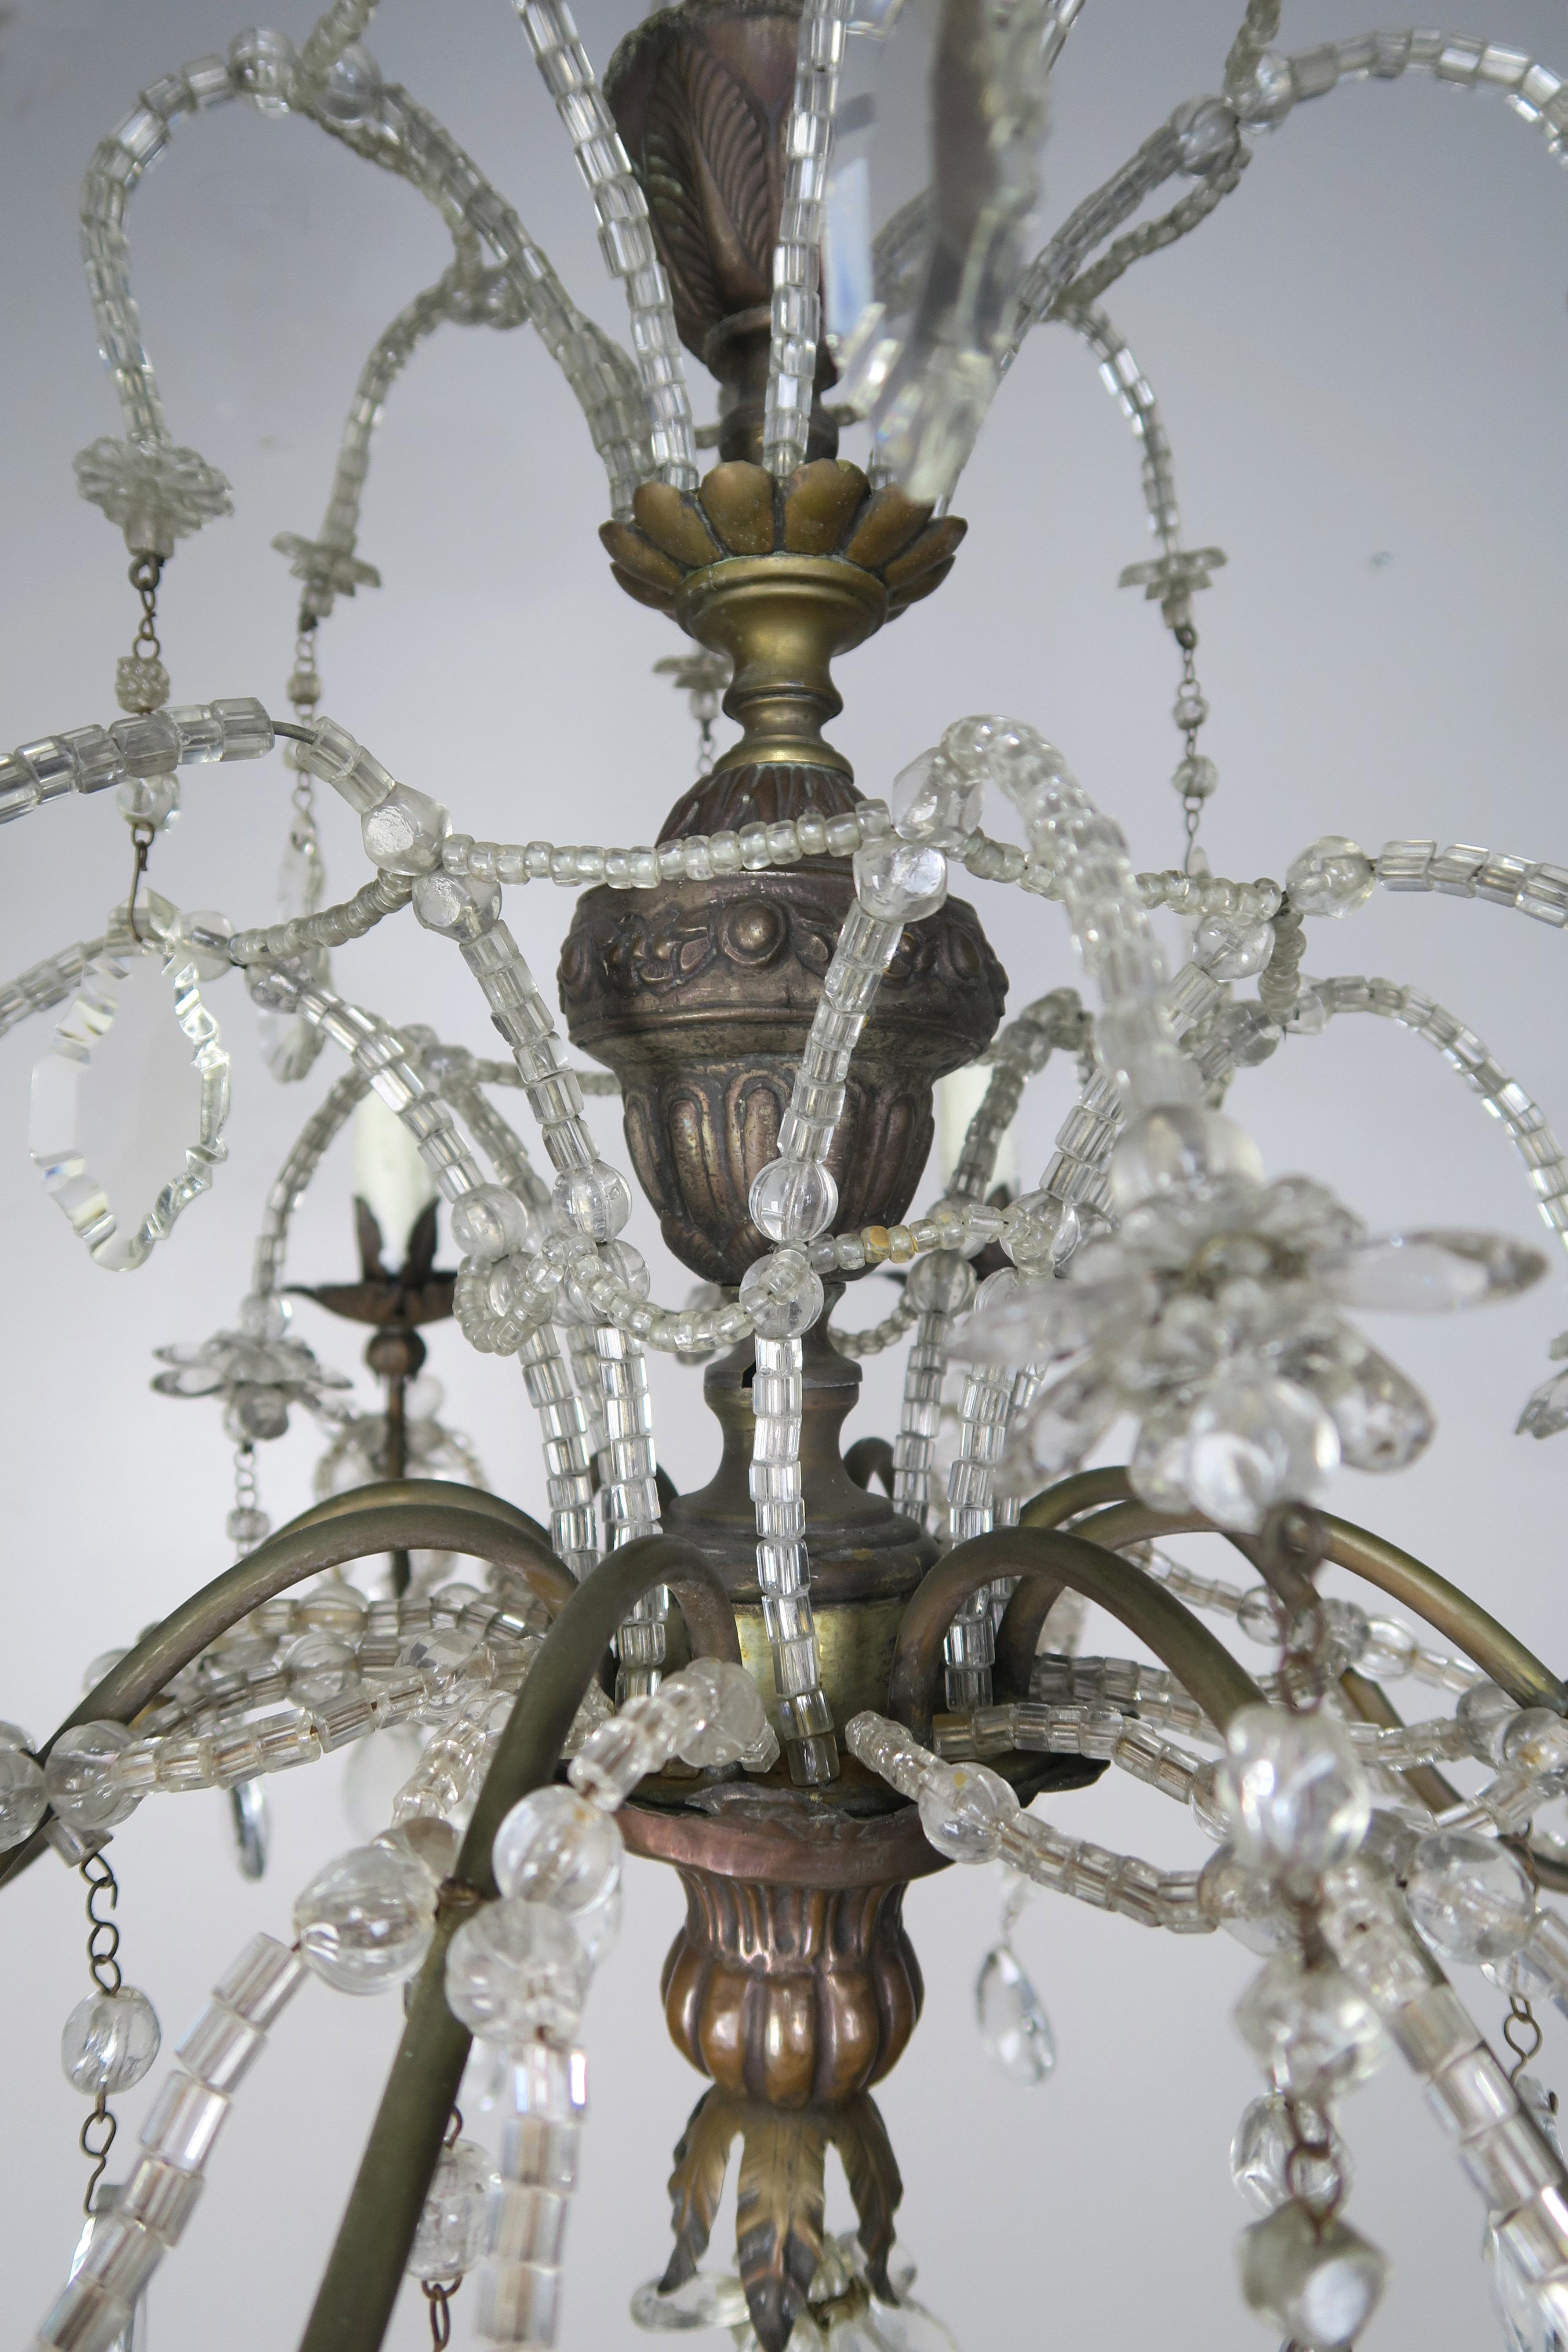 Eight-light Italian crystal brass waterfall style chandelier with crystal beads beautifully placed lightly throughout the chandelier with drop of beads forming intricate designs throughout the light fixture. The chandelier has been newly rewired